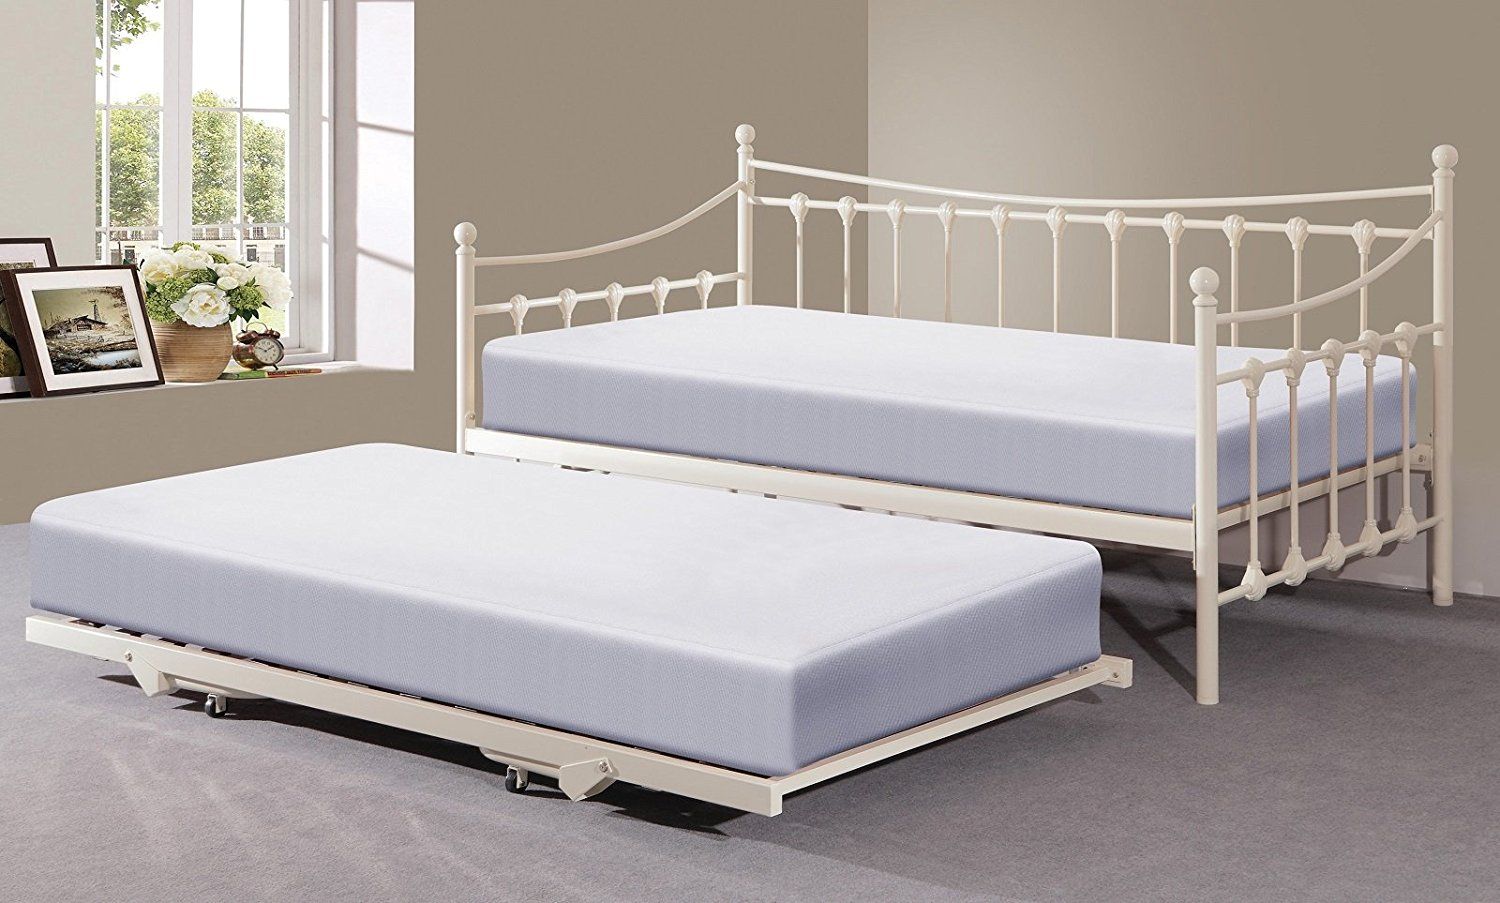 Basic principles of purchasing single beds